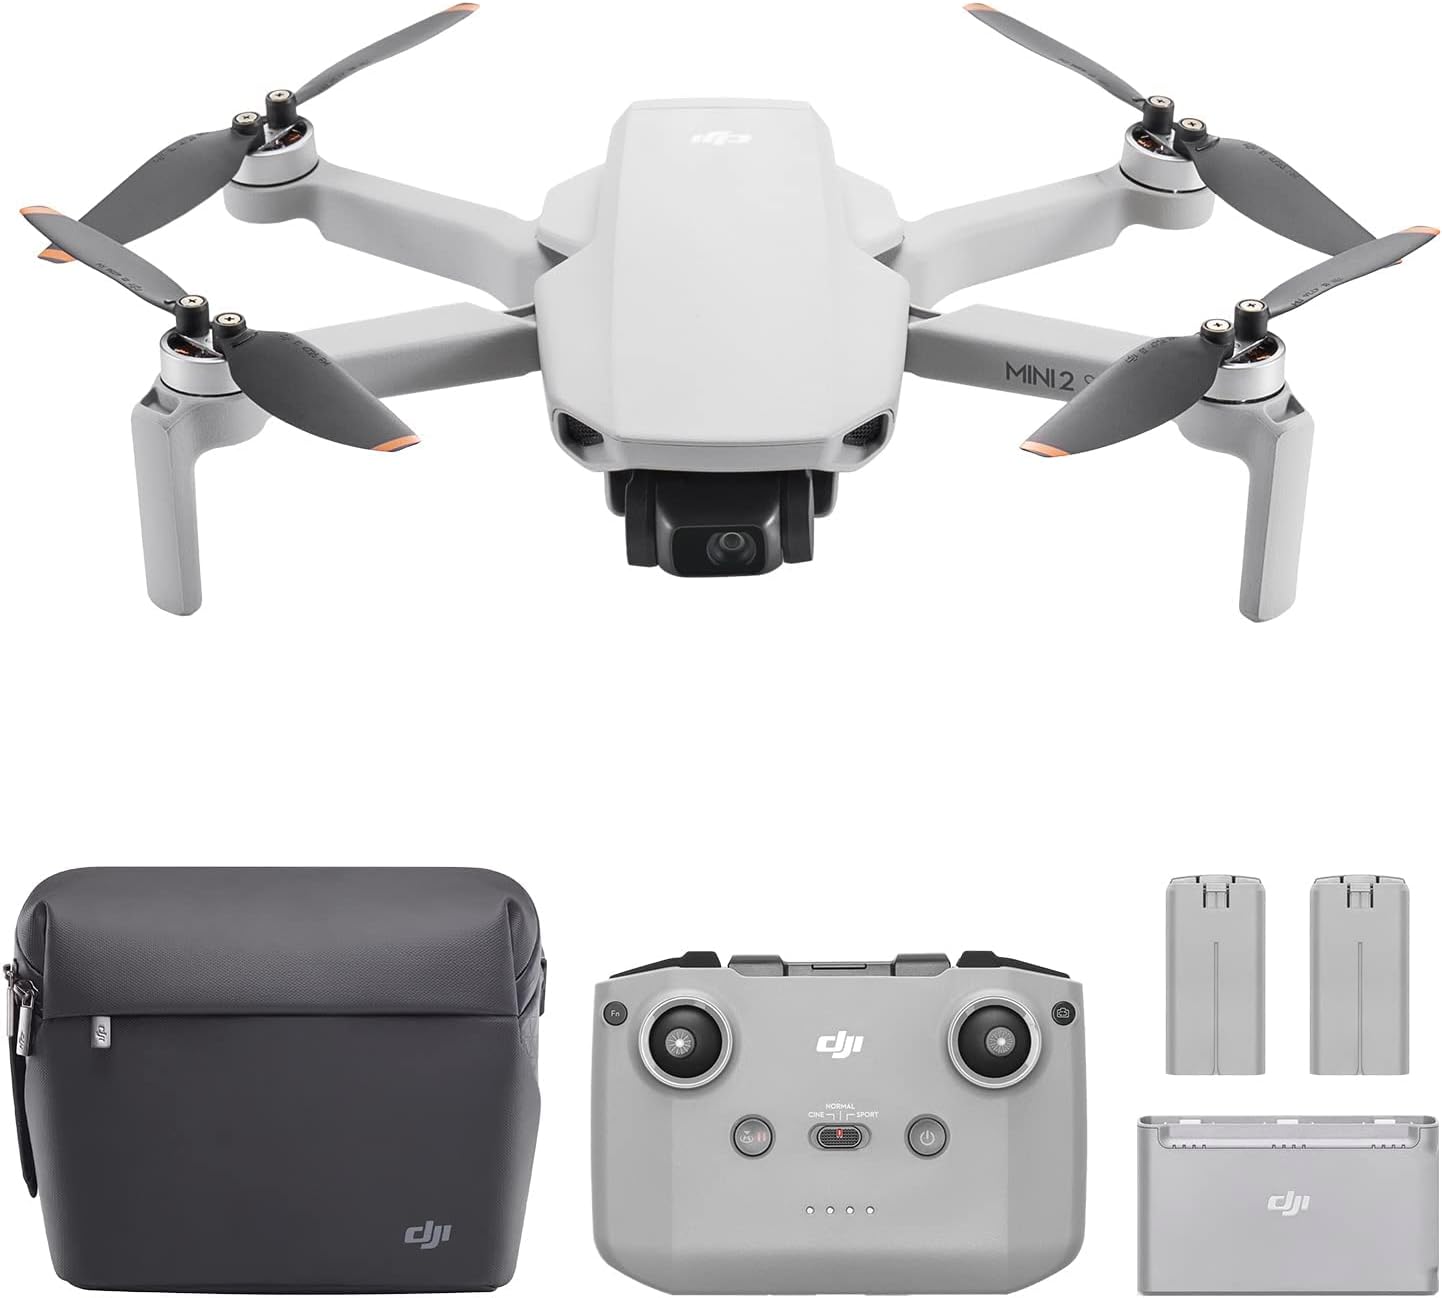 DJI Mini 2 SE, Lightweight and Foldable Mini Drone with QHD Video, 10km Video Transmission, 31-min Flight Time, Under 249 g, Return to Home, Automatic Pro Shots, Drone with Camera for Beginners